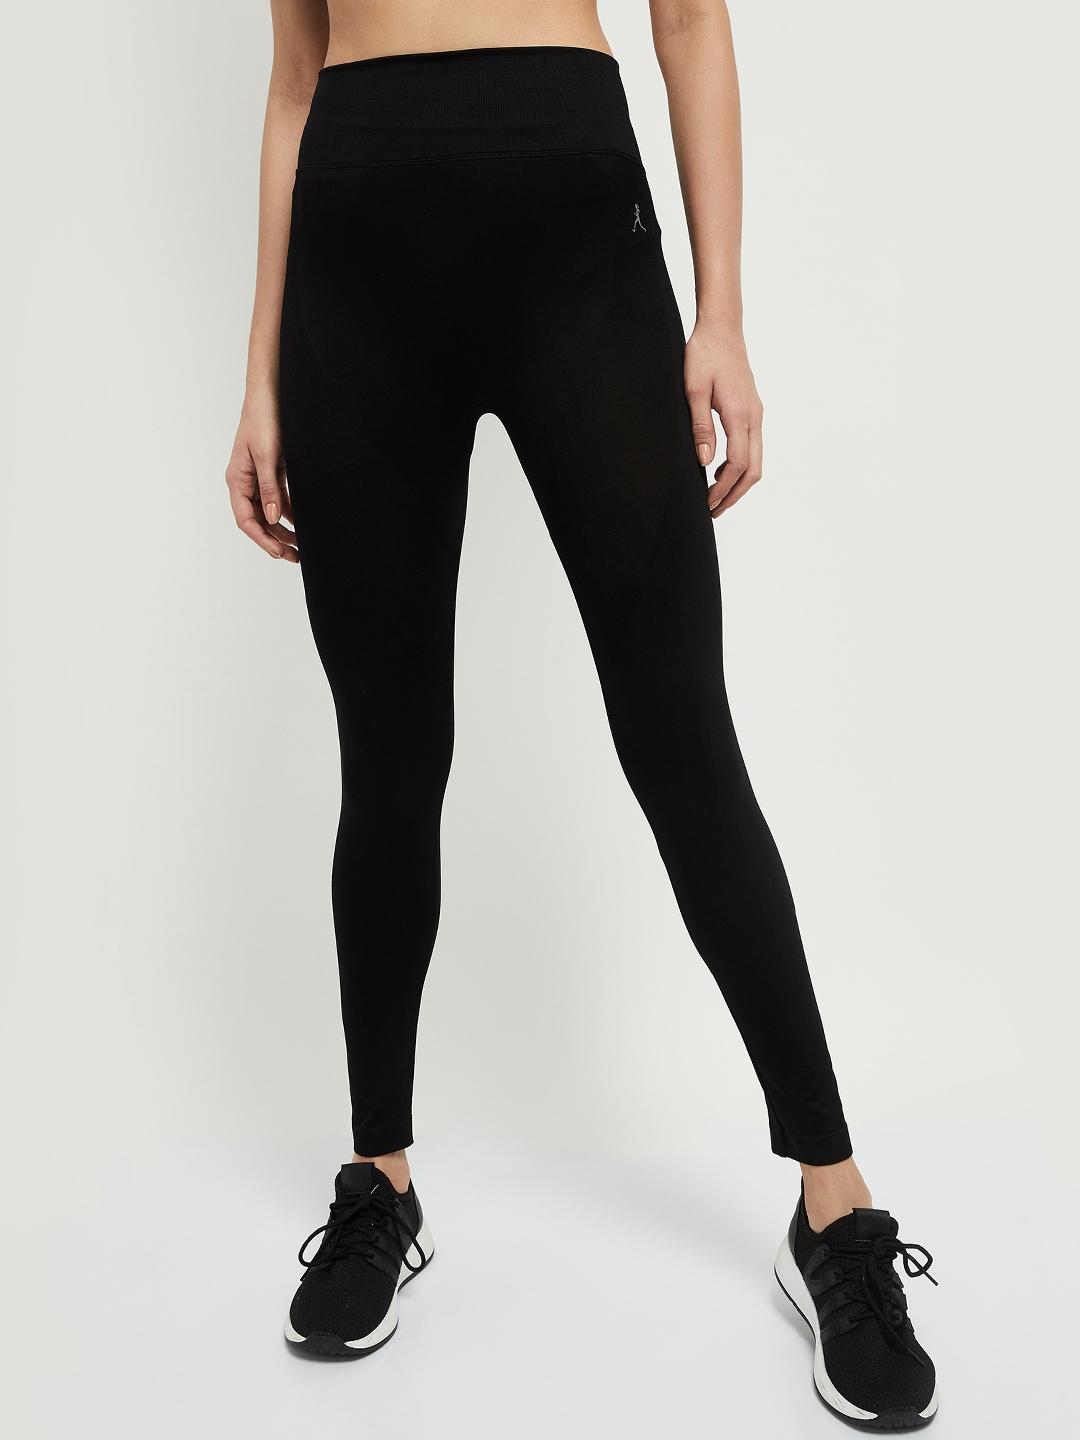 Buy Max Women Black Solid Tights - Tights for Women 13166806 | Myntra